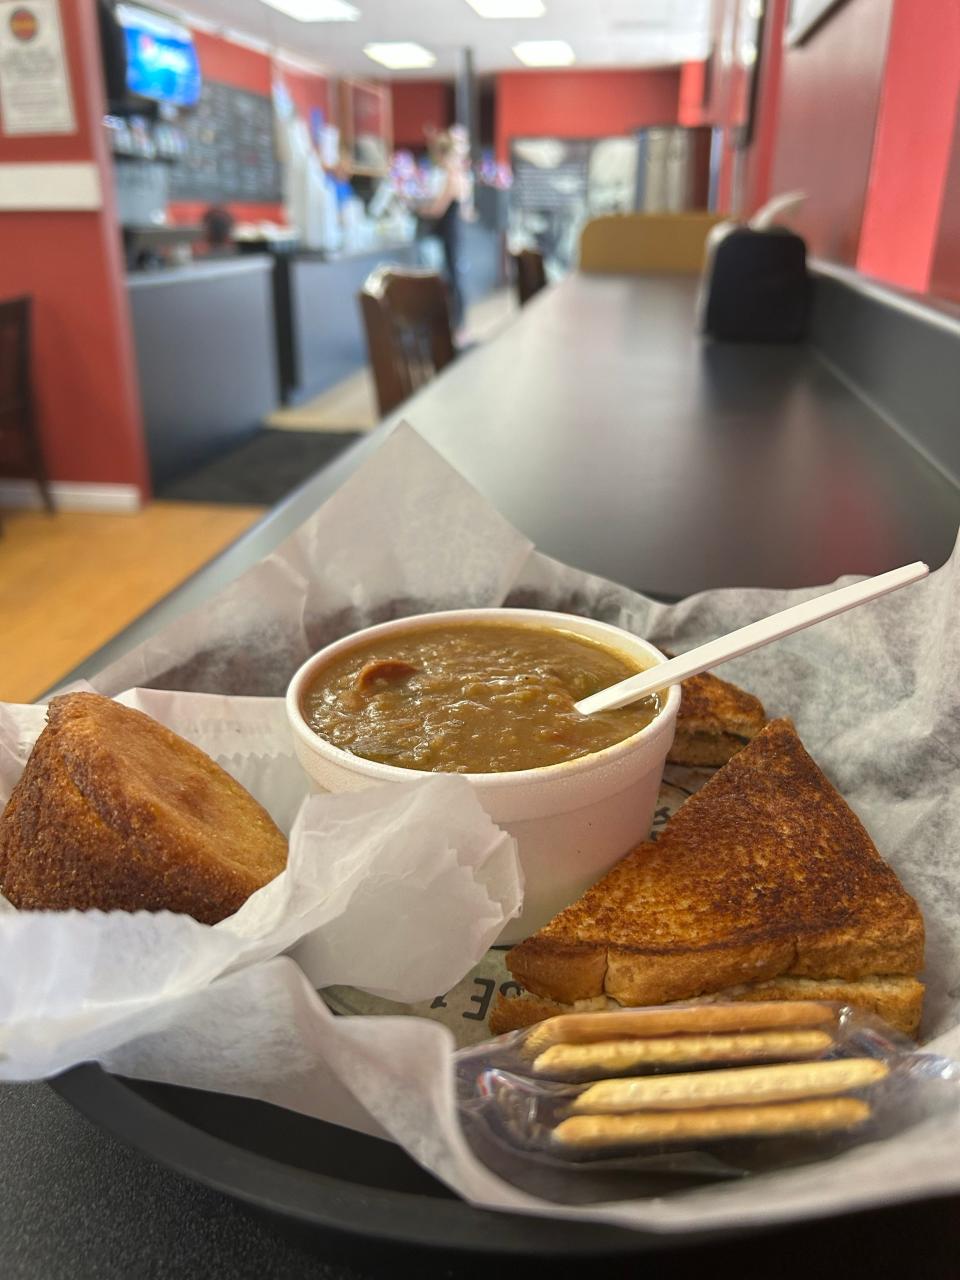 Toasted Chicken Salad Sandwich with homemade gumbo and cornbread from Duke's Sandwich Company in Cherrydale.